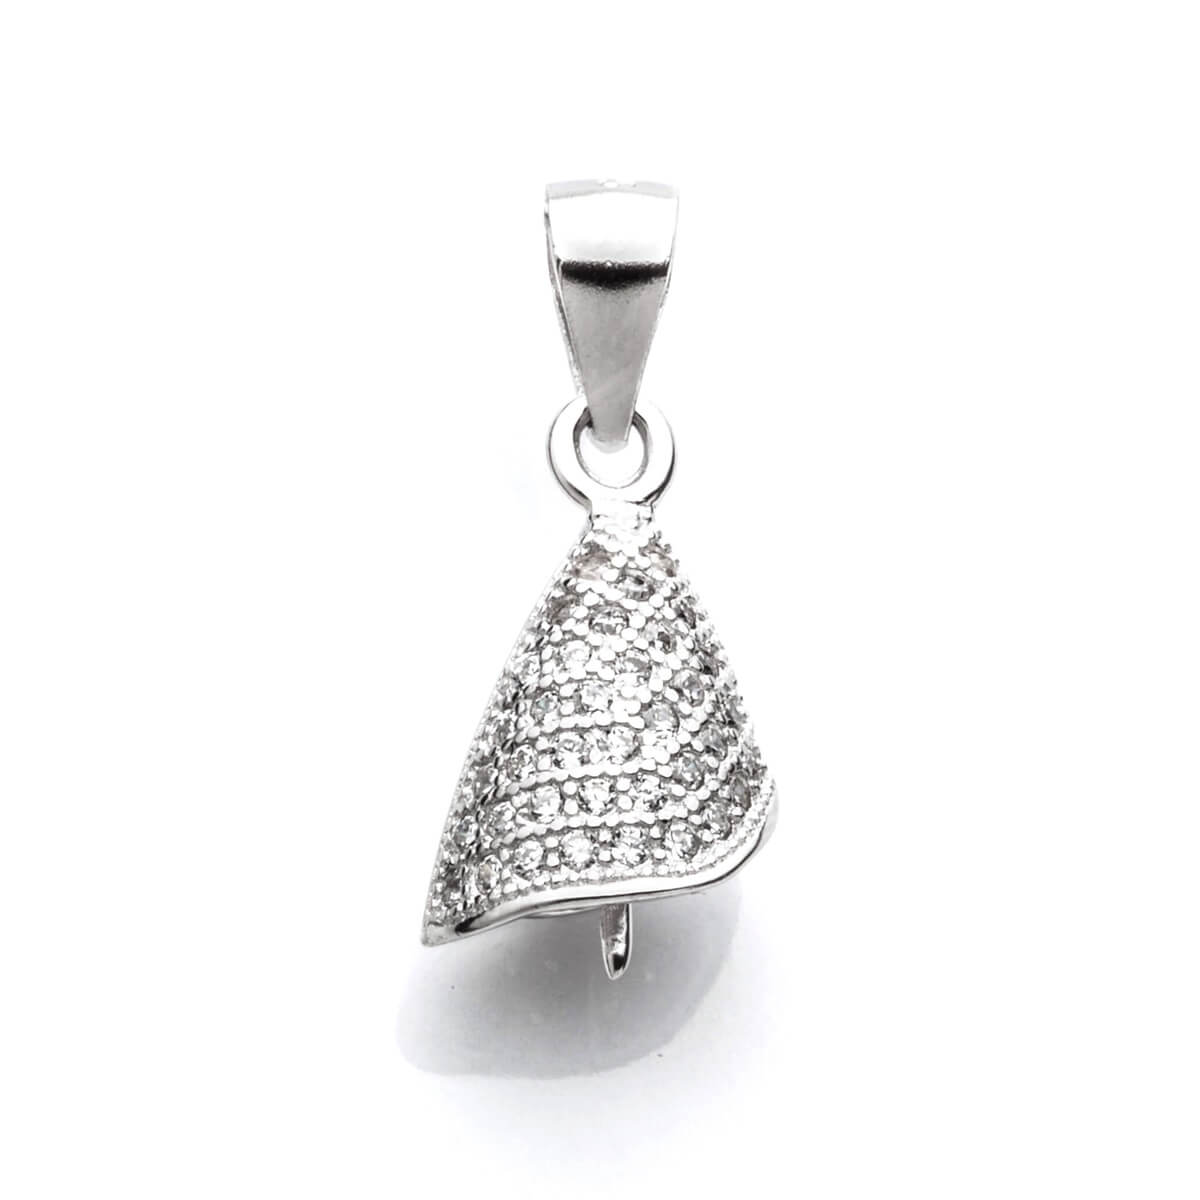 Angled Cone Pendant with Cubic Zirconia Inlays and Peg Mounting and Bail in Sterling Silver 5mm 